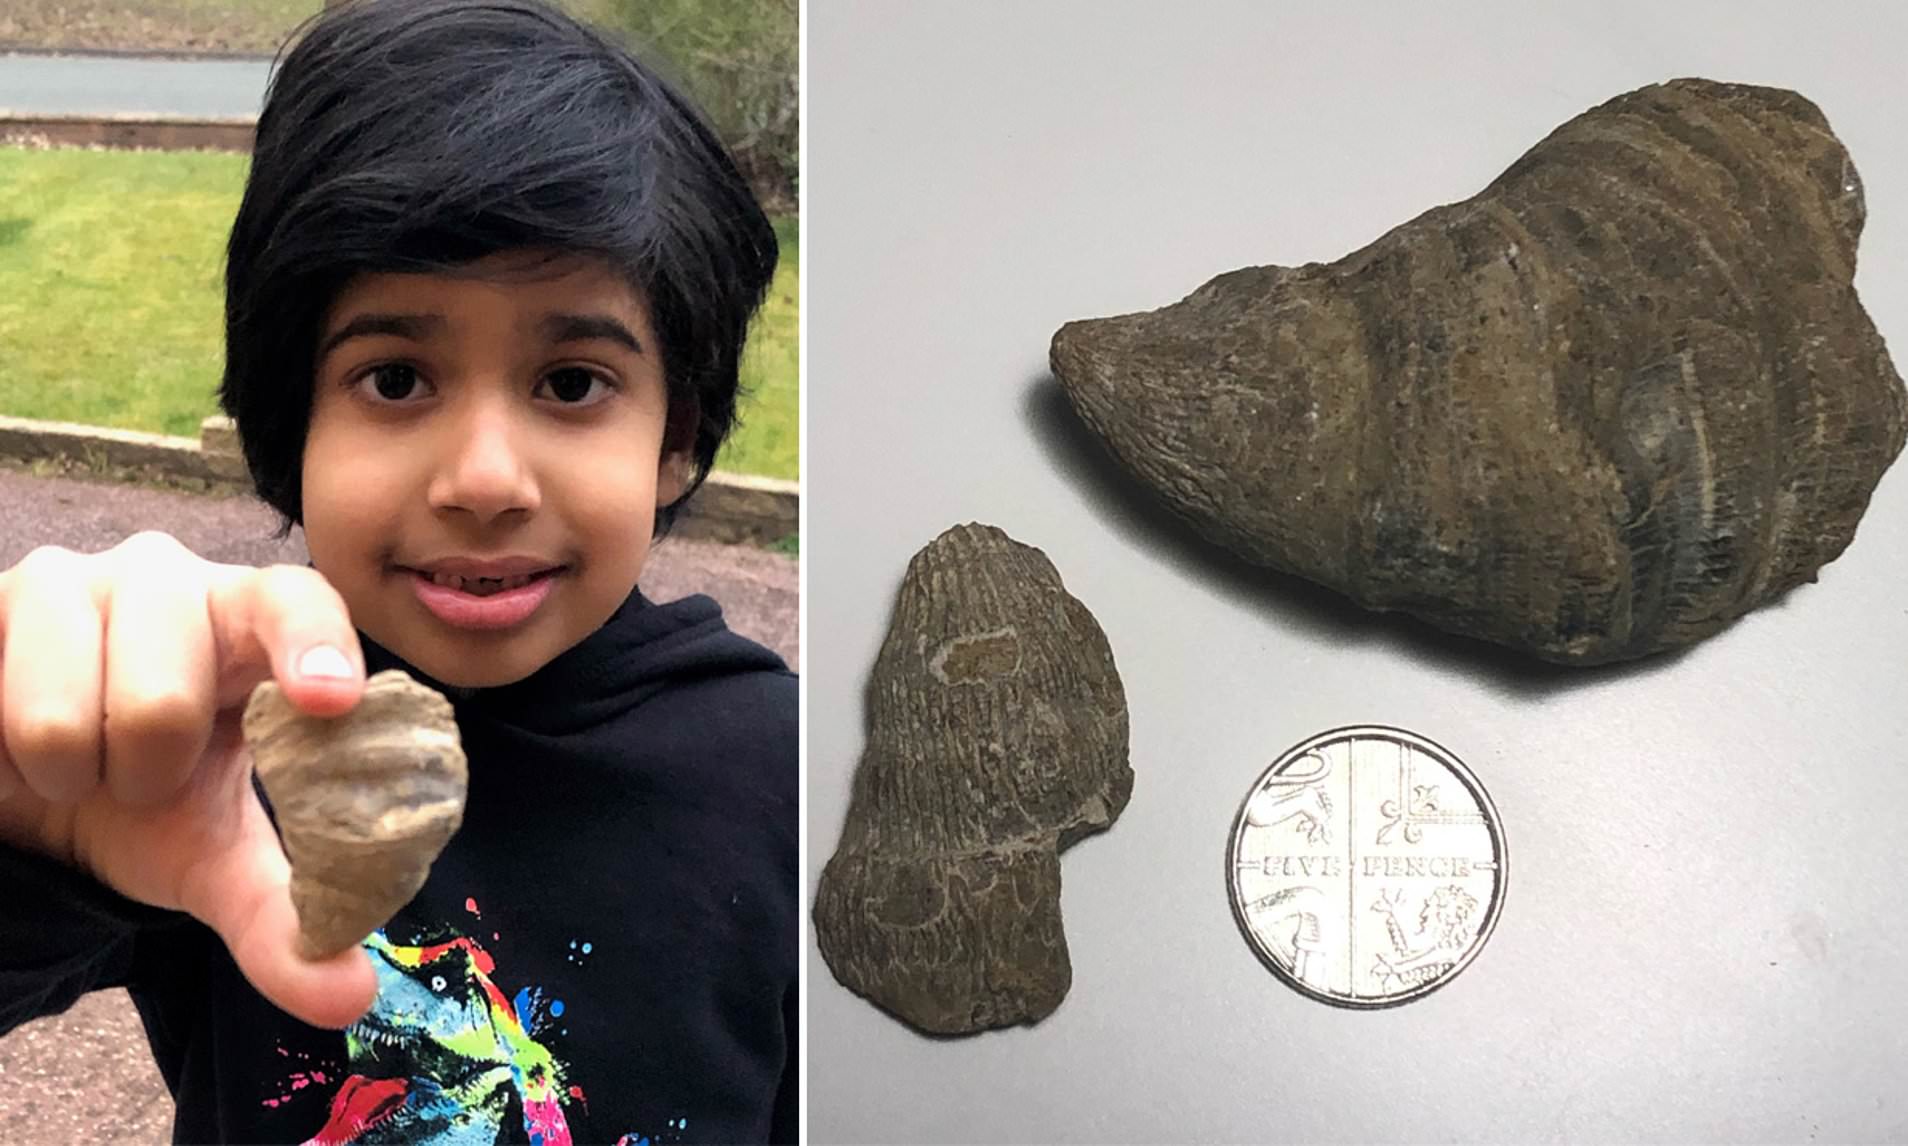 The boy who found a fossil in his garden proudly shows his discovery.